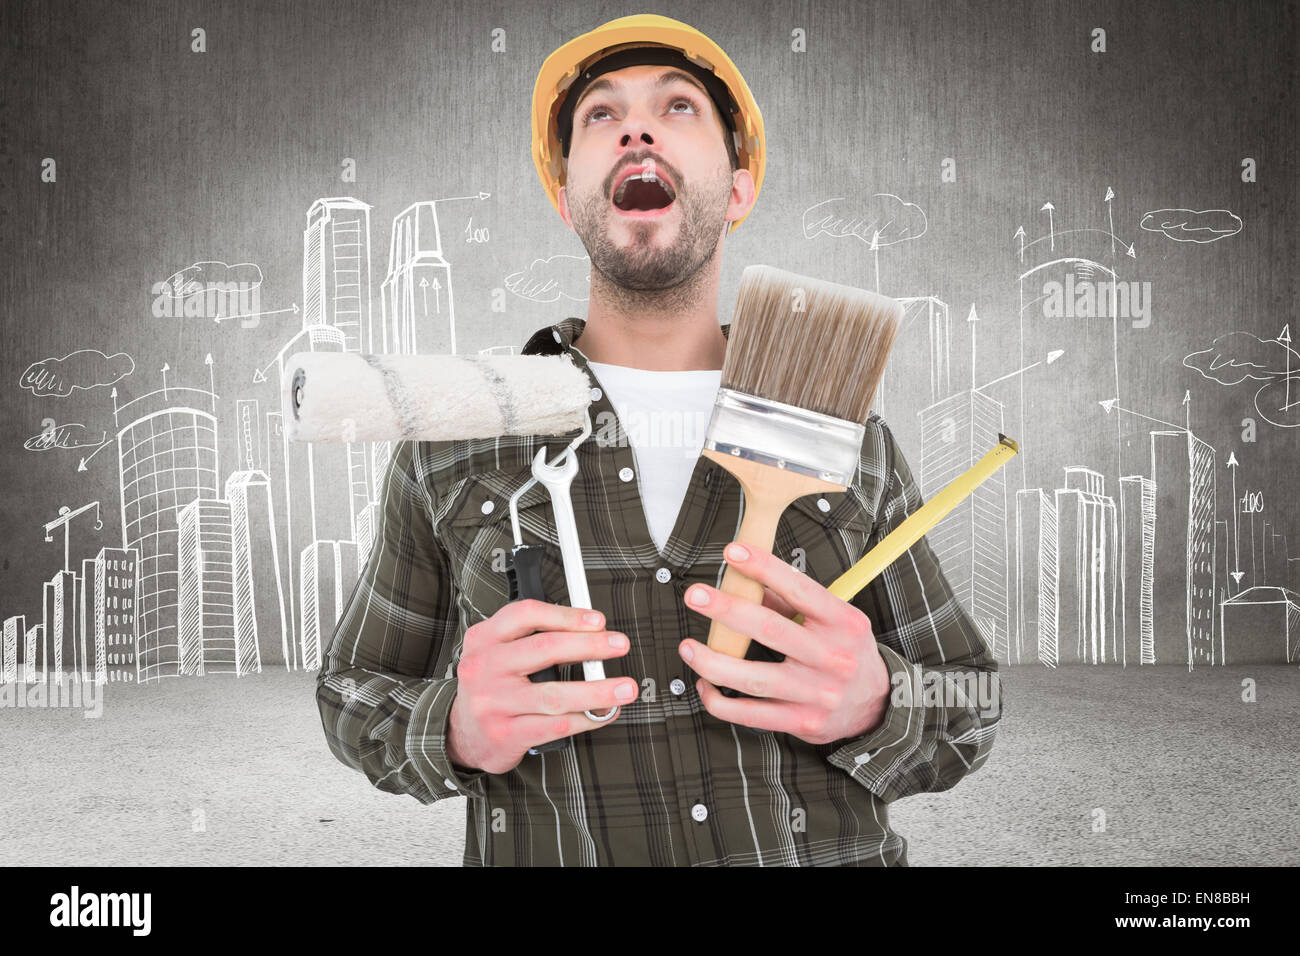 Composite image of screaming manual worker holding various tools Stock Photo